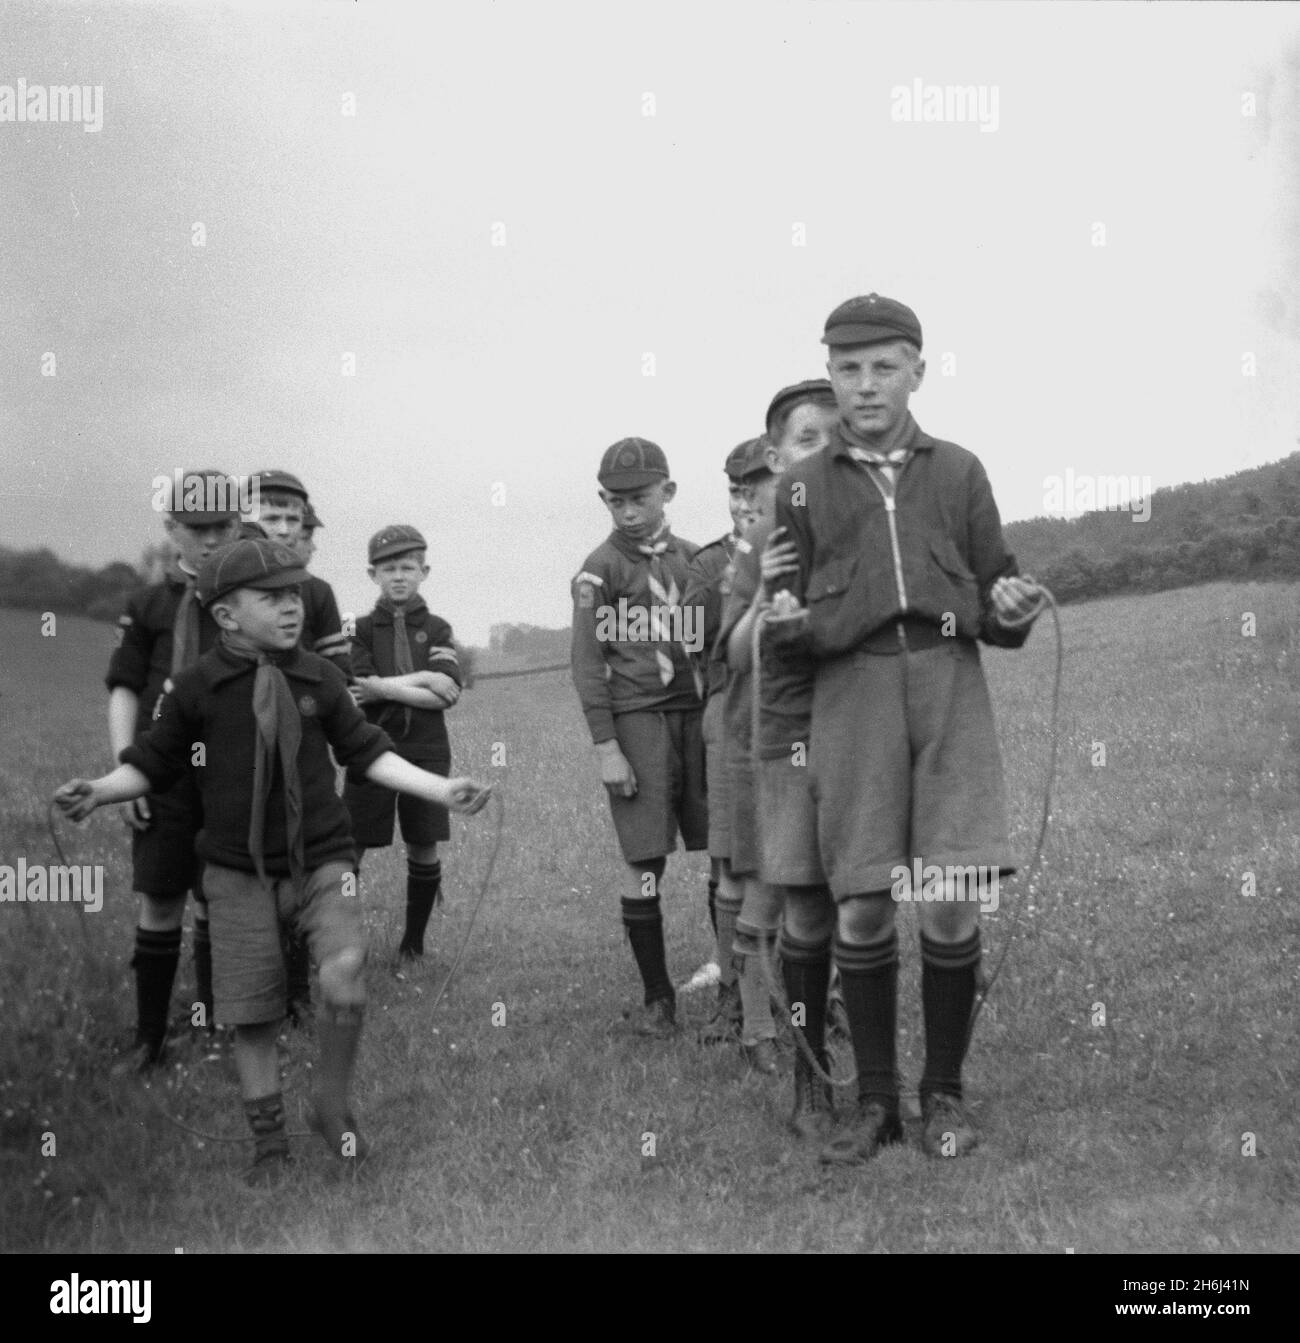 1941, historical, scout camp, sports, outside in a field, cub scouts in their uniforms and caps line up, to take on the bigger boys in a skipping contest, England, UK. Young scouts or wolf cubs were launched for younger boys in 1914. Scouting began in 1908, after British Army Officer Robert Baden-Powell had held an experimental camp on Brownsea Island, Poole Harbour, the previous summer, with about 20 boys who were taught a range of outdoor skills, including tracking, firelighting, making shelters out of branches, knotting, cooking, health and sanitation, life-saving and First Aid. Stock Photo